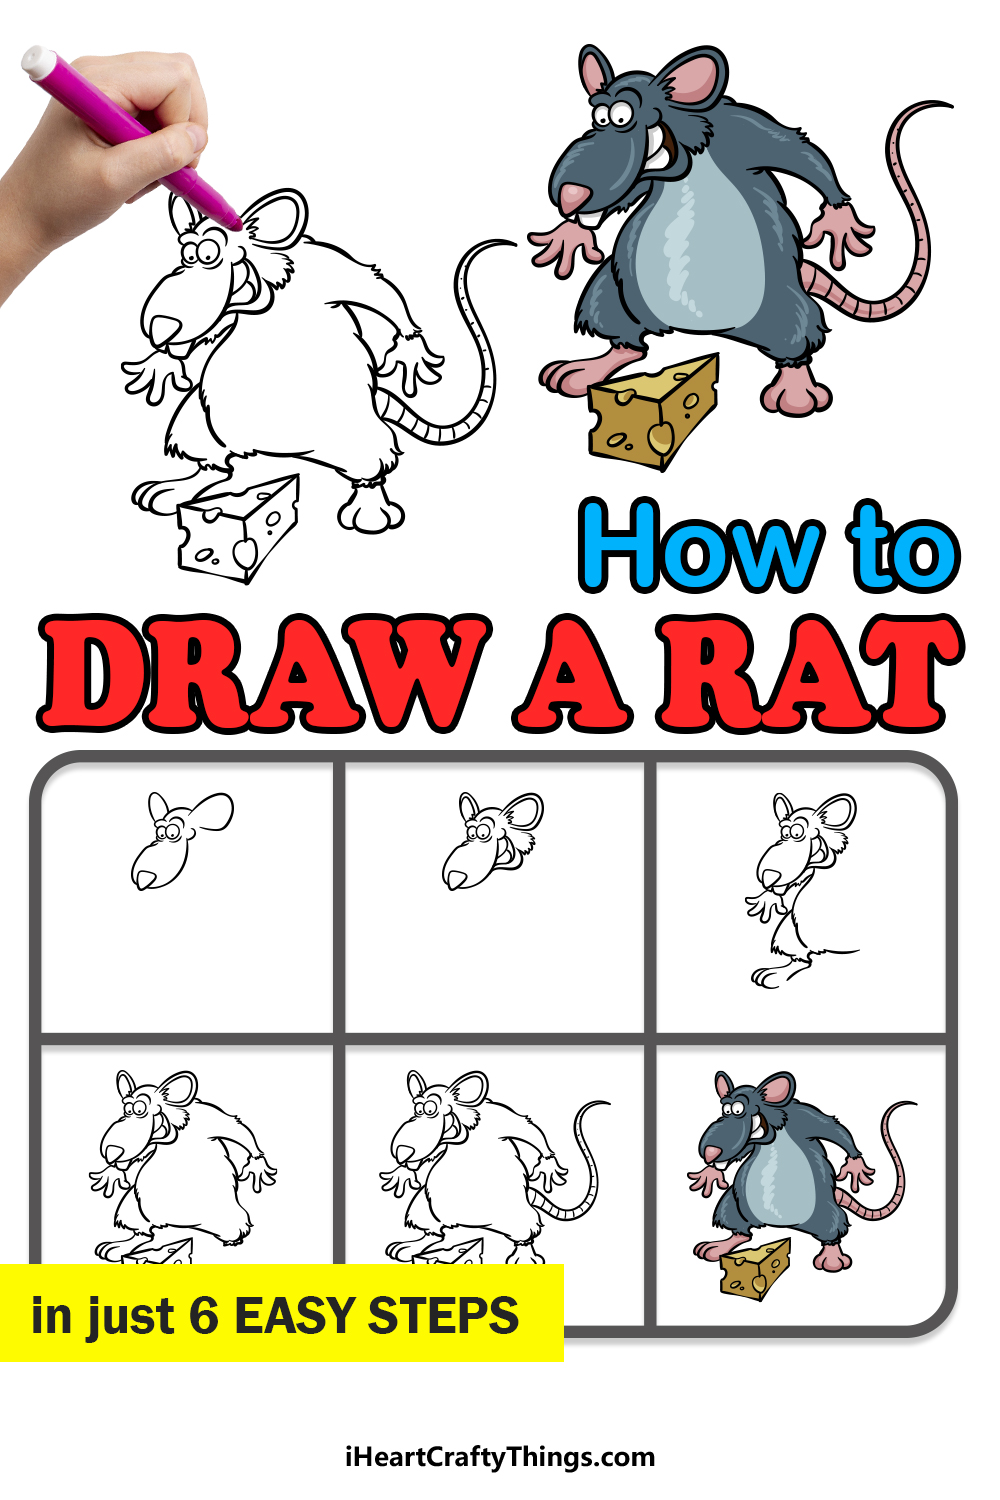 how to draw a Rat in 6 steps